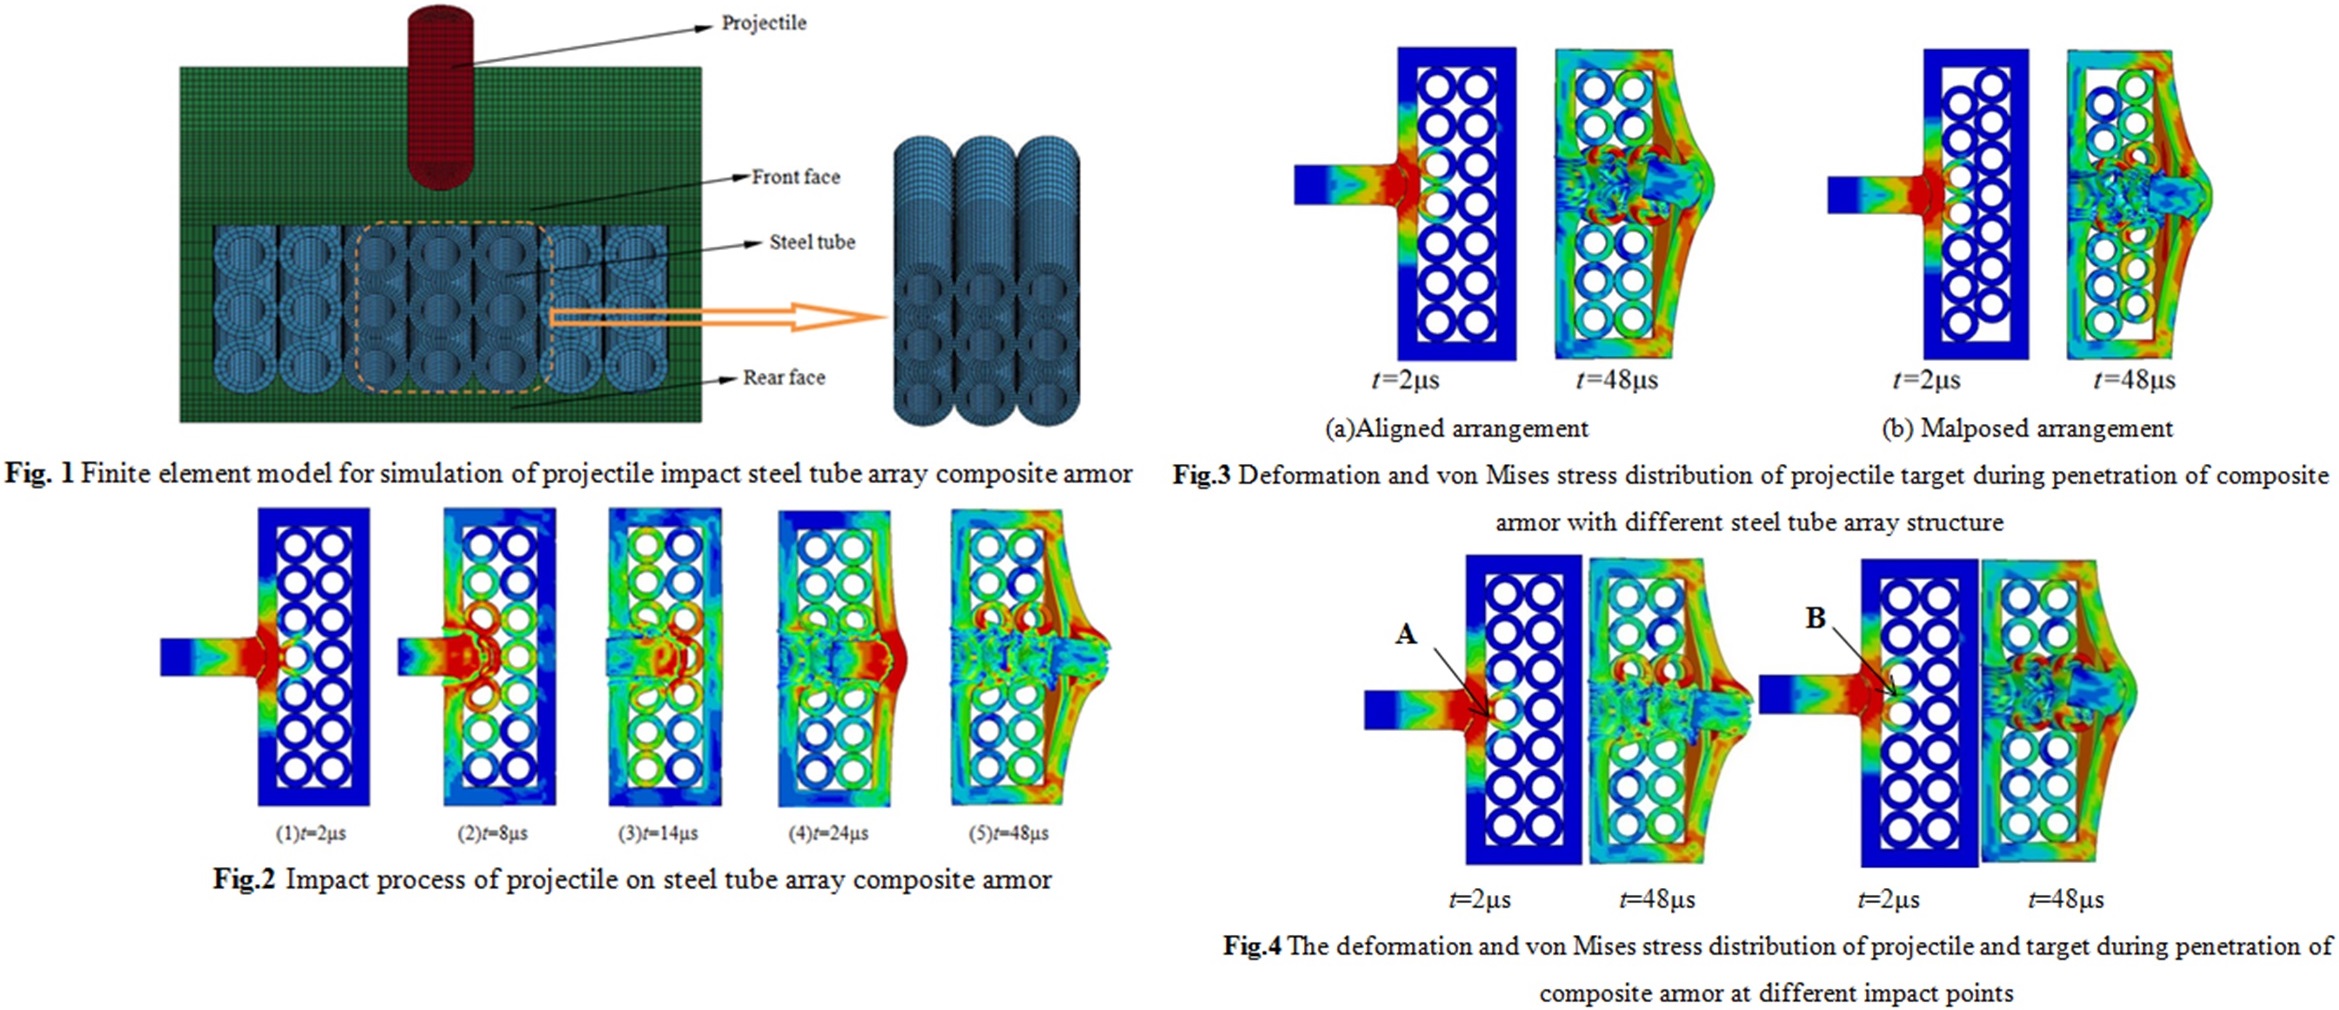 Numerical simulation of steel tube array composite armor structure against rod projectile penetration